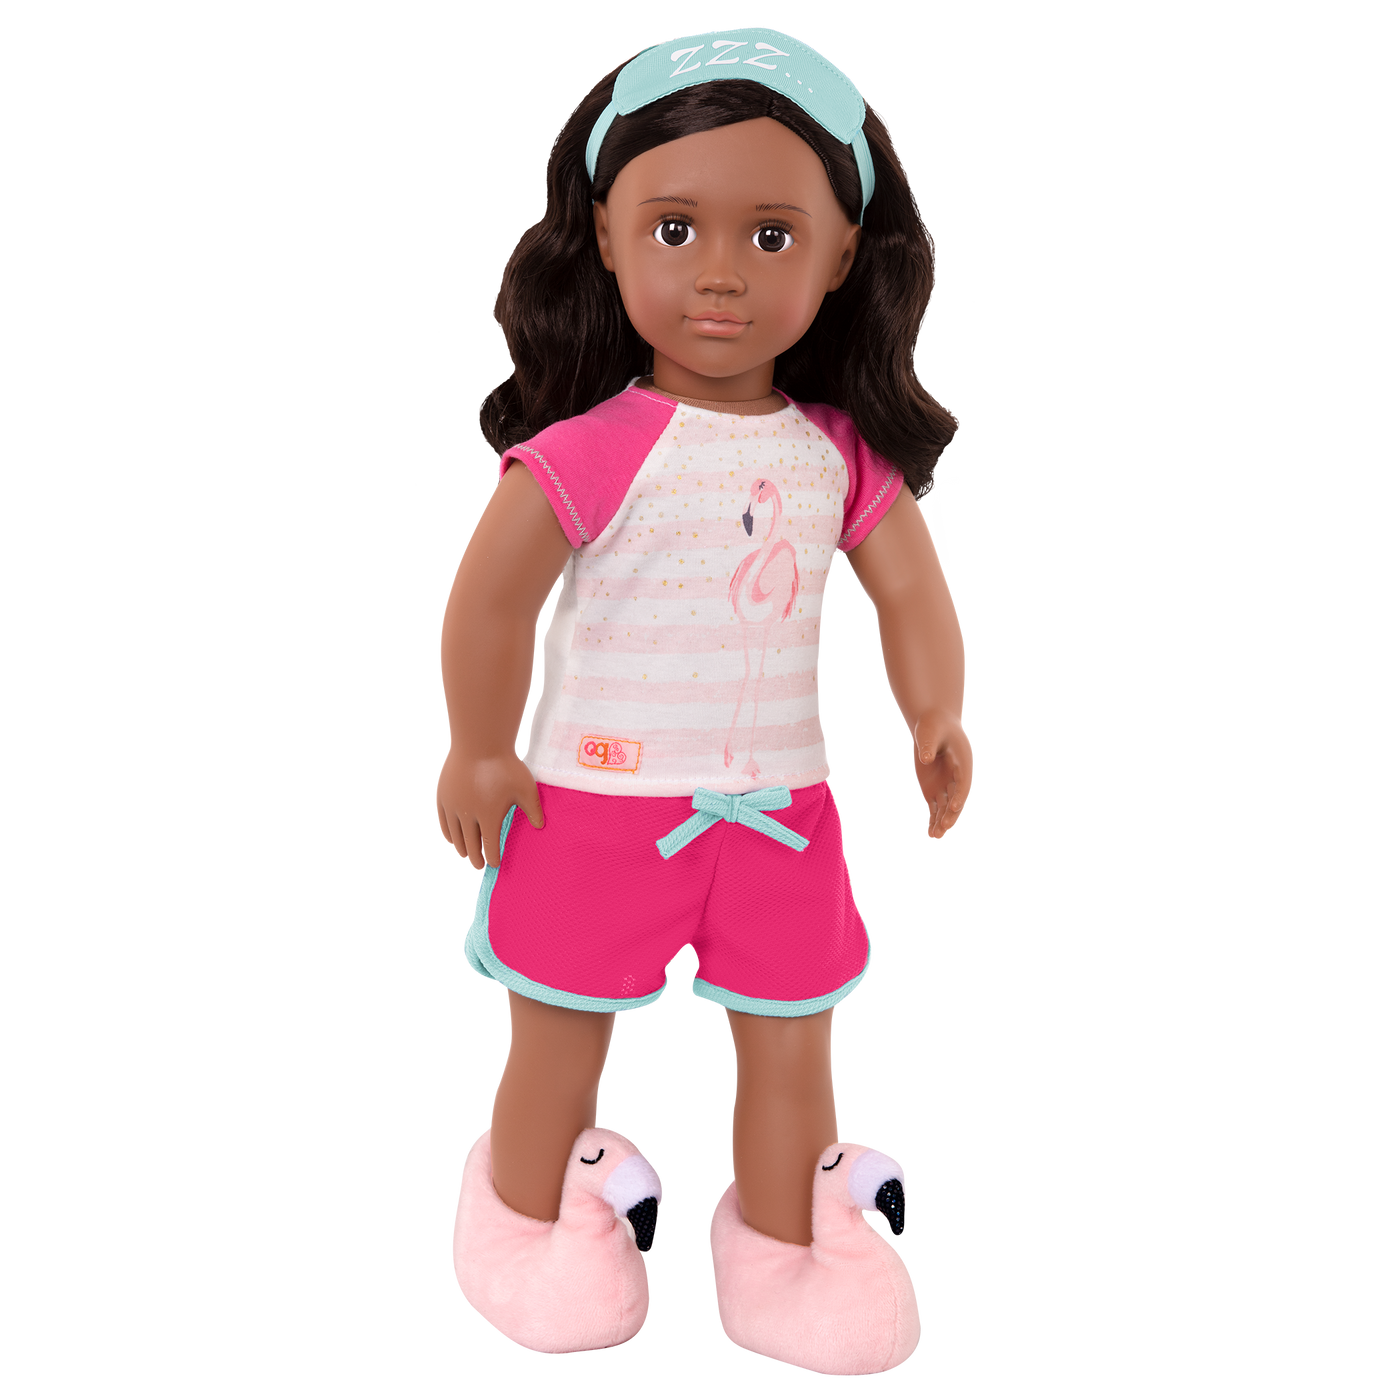 Flamingo Dreaming Pajama Outfit for 18-inch Dolls Pink Slippers